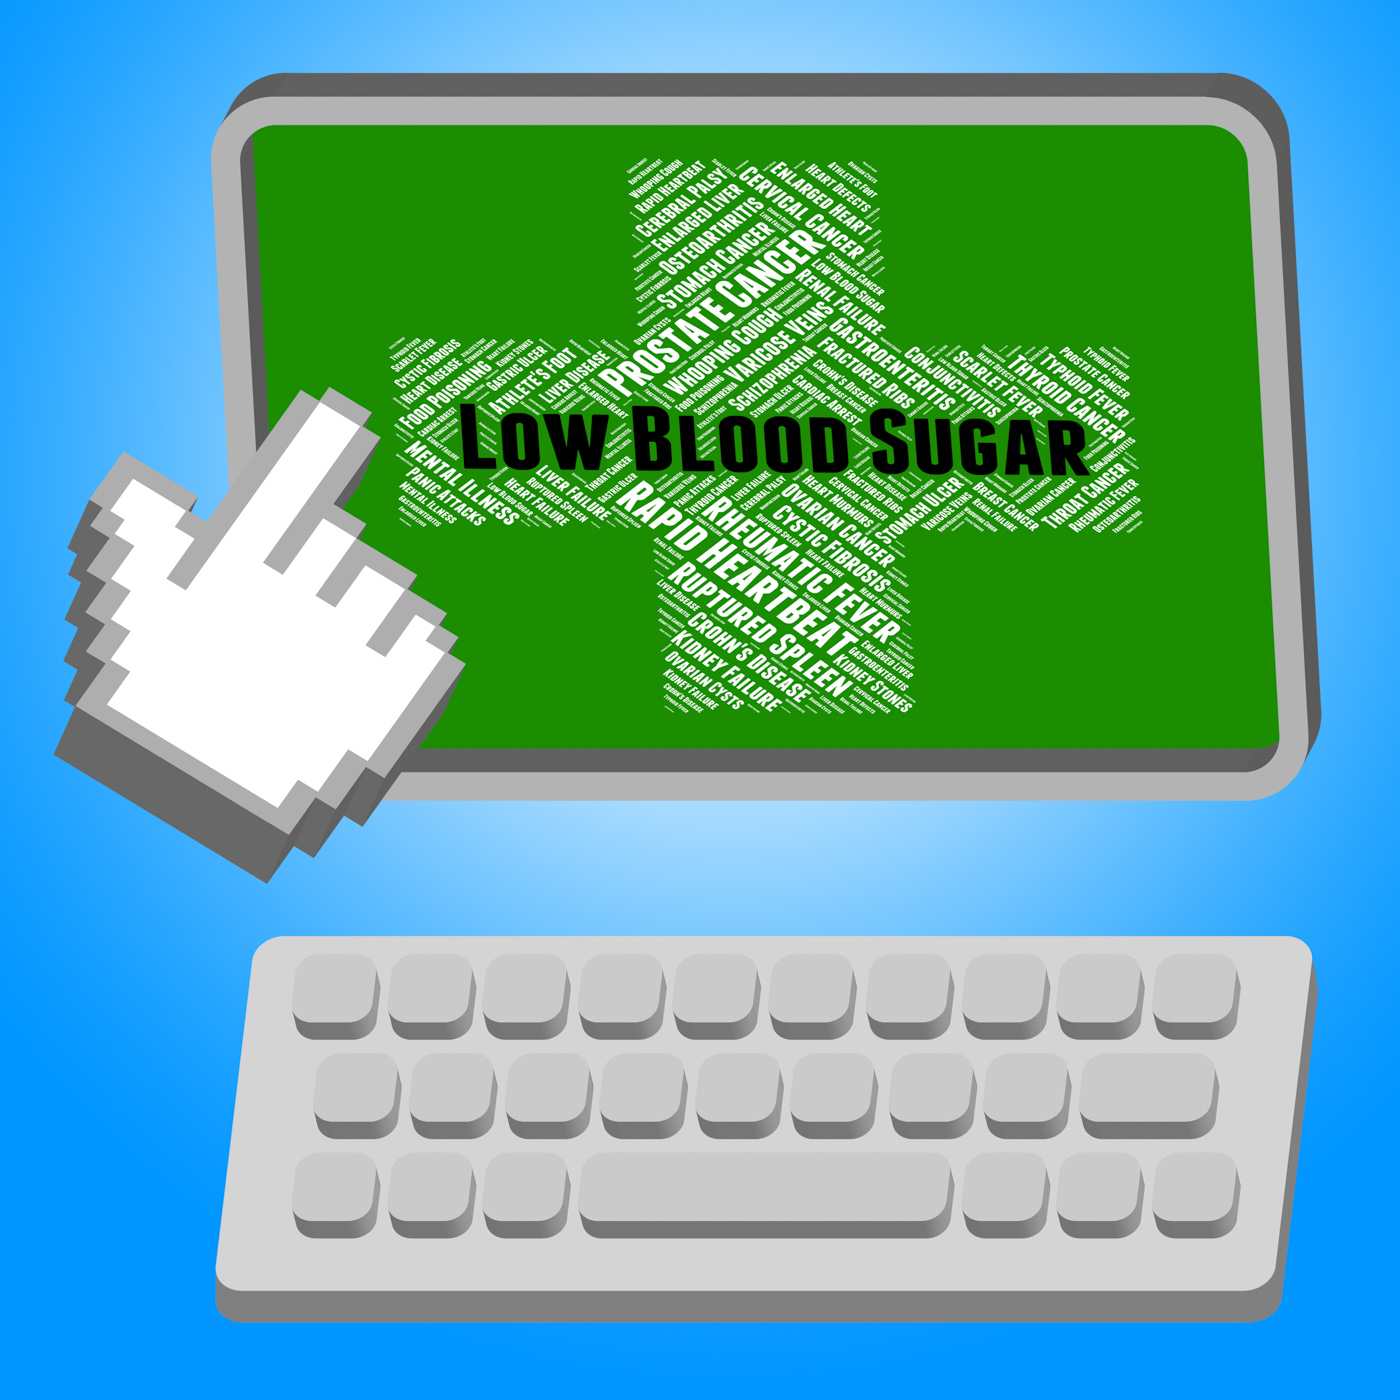 Low blood sugar means poor health and afflictions photo